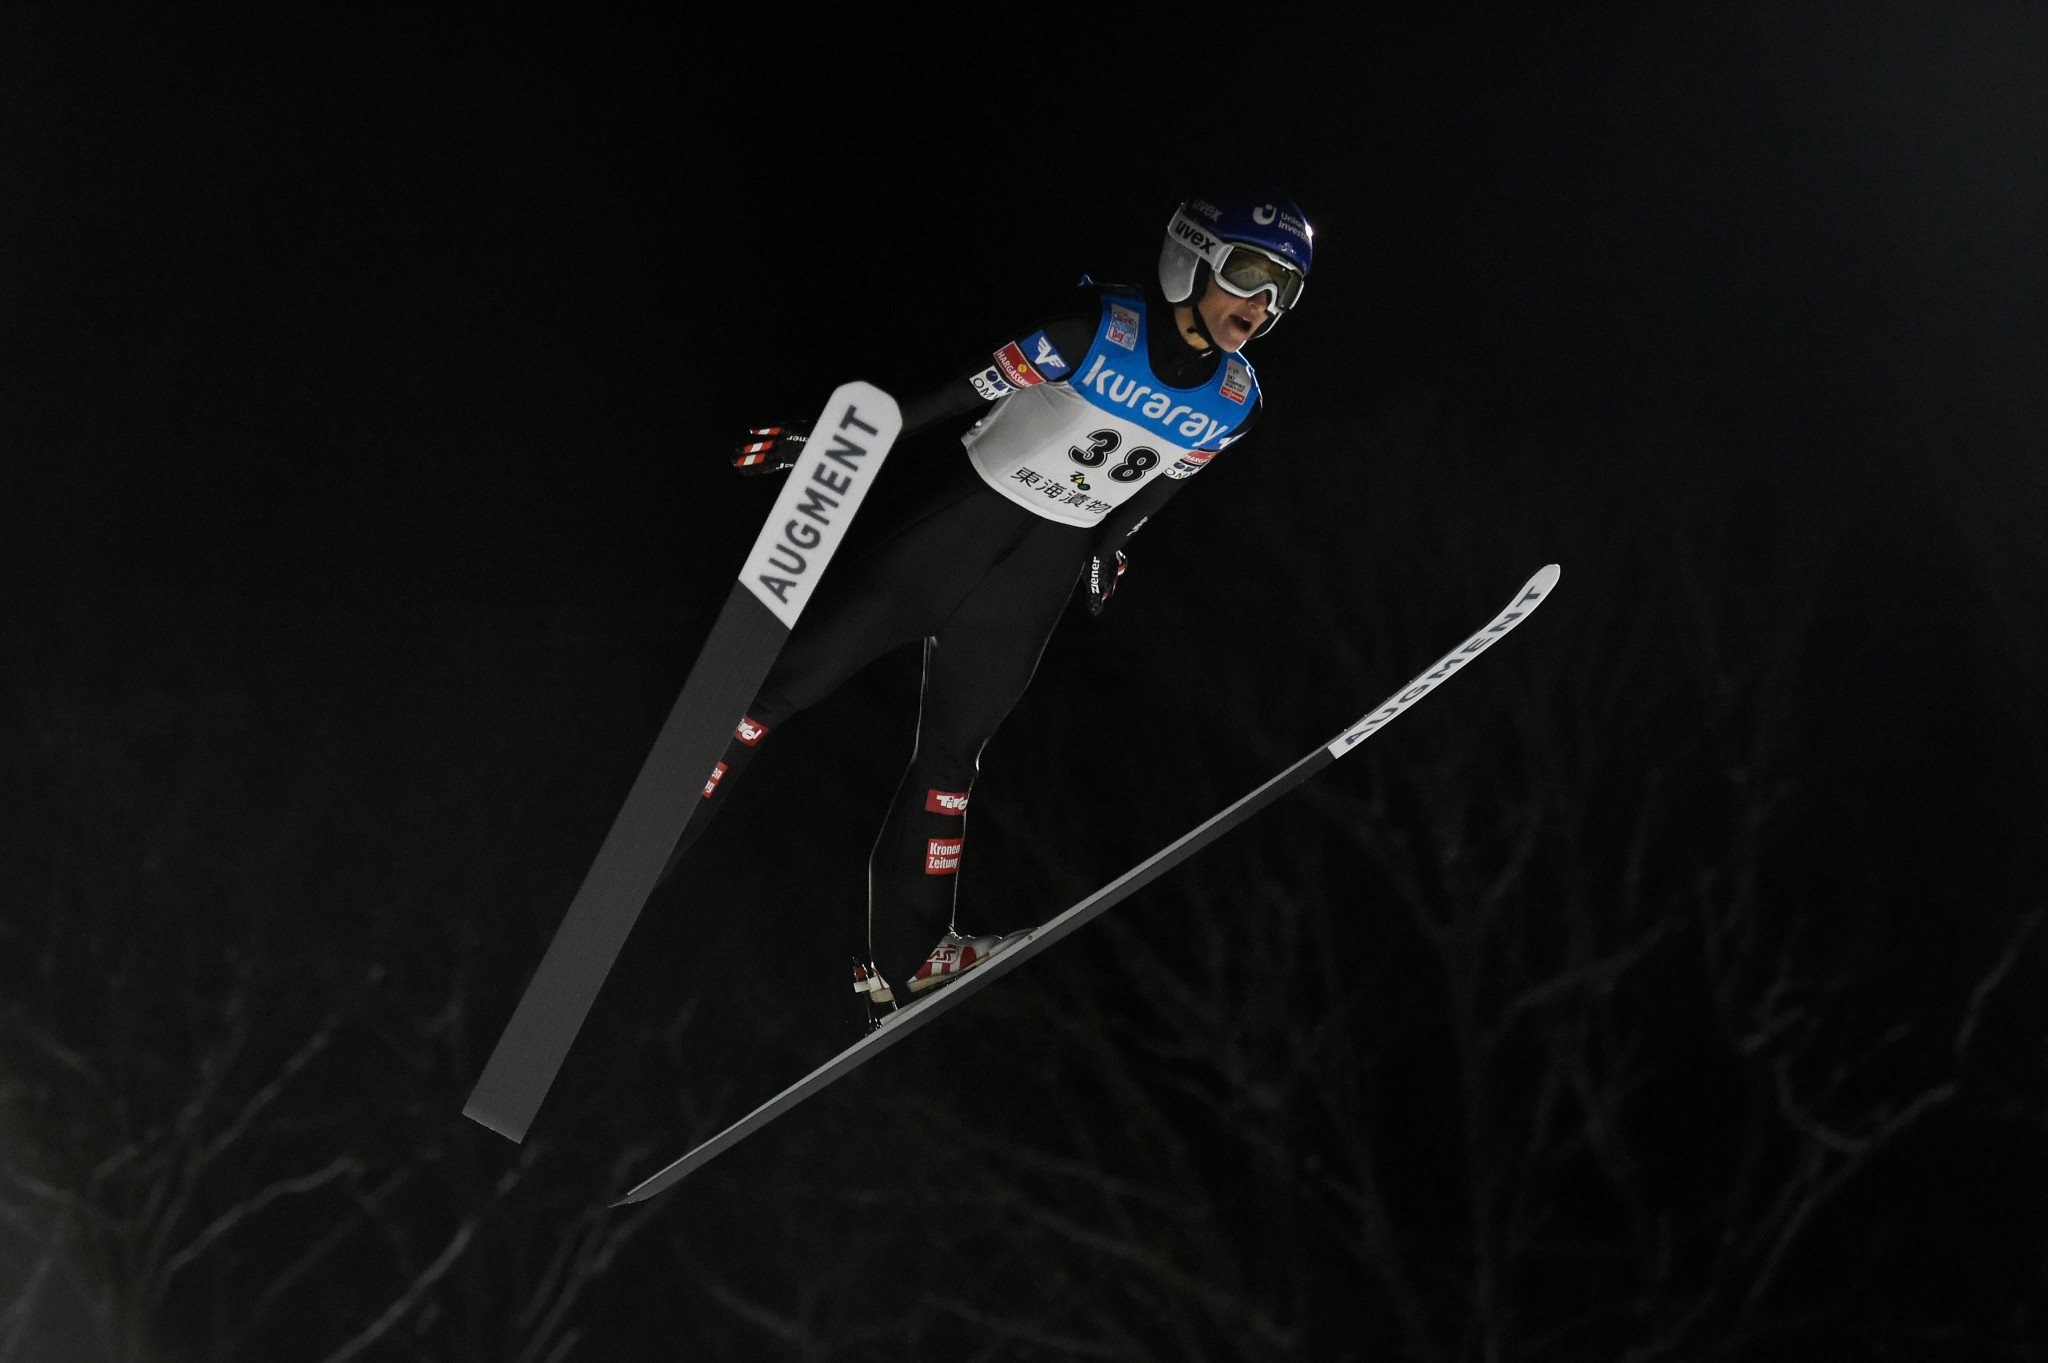 Austria's Eva Pinkelnig is in the form of her life on the FIS Ski Jumping World Cup tour ©Getty Images